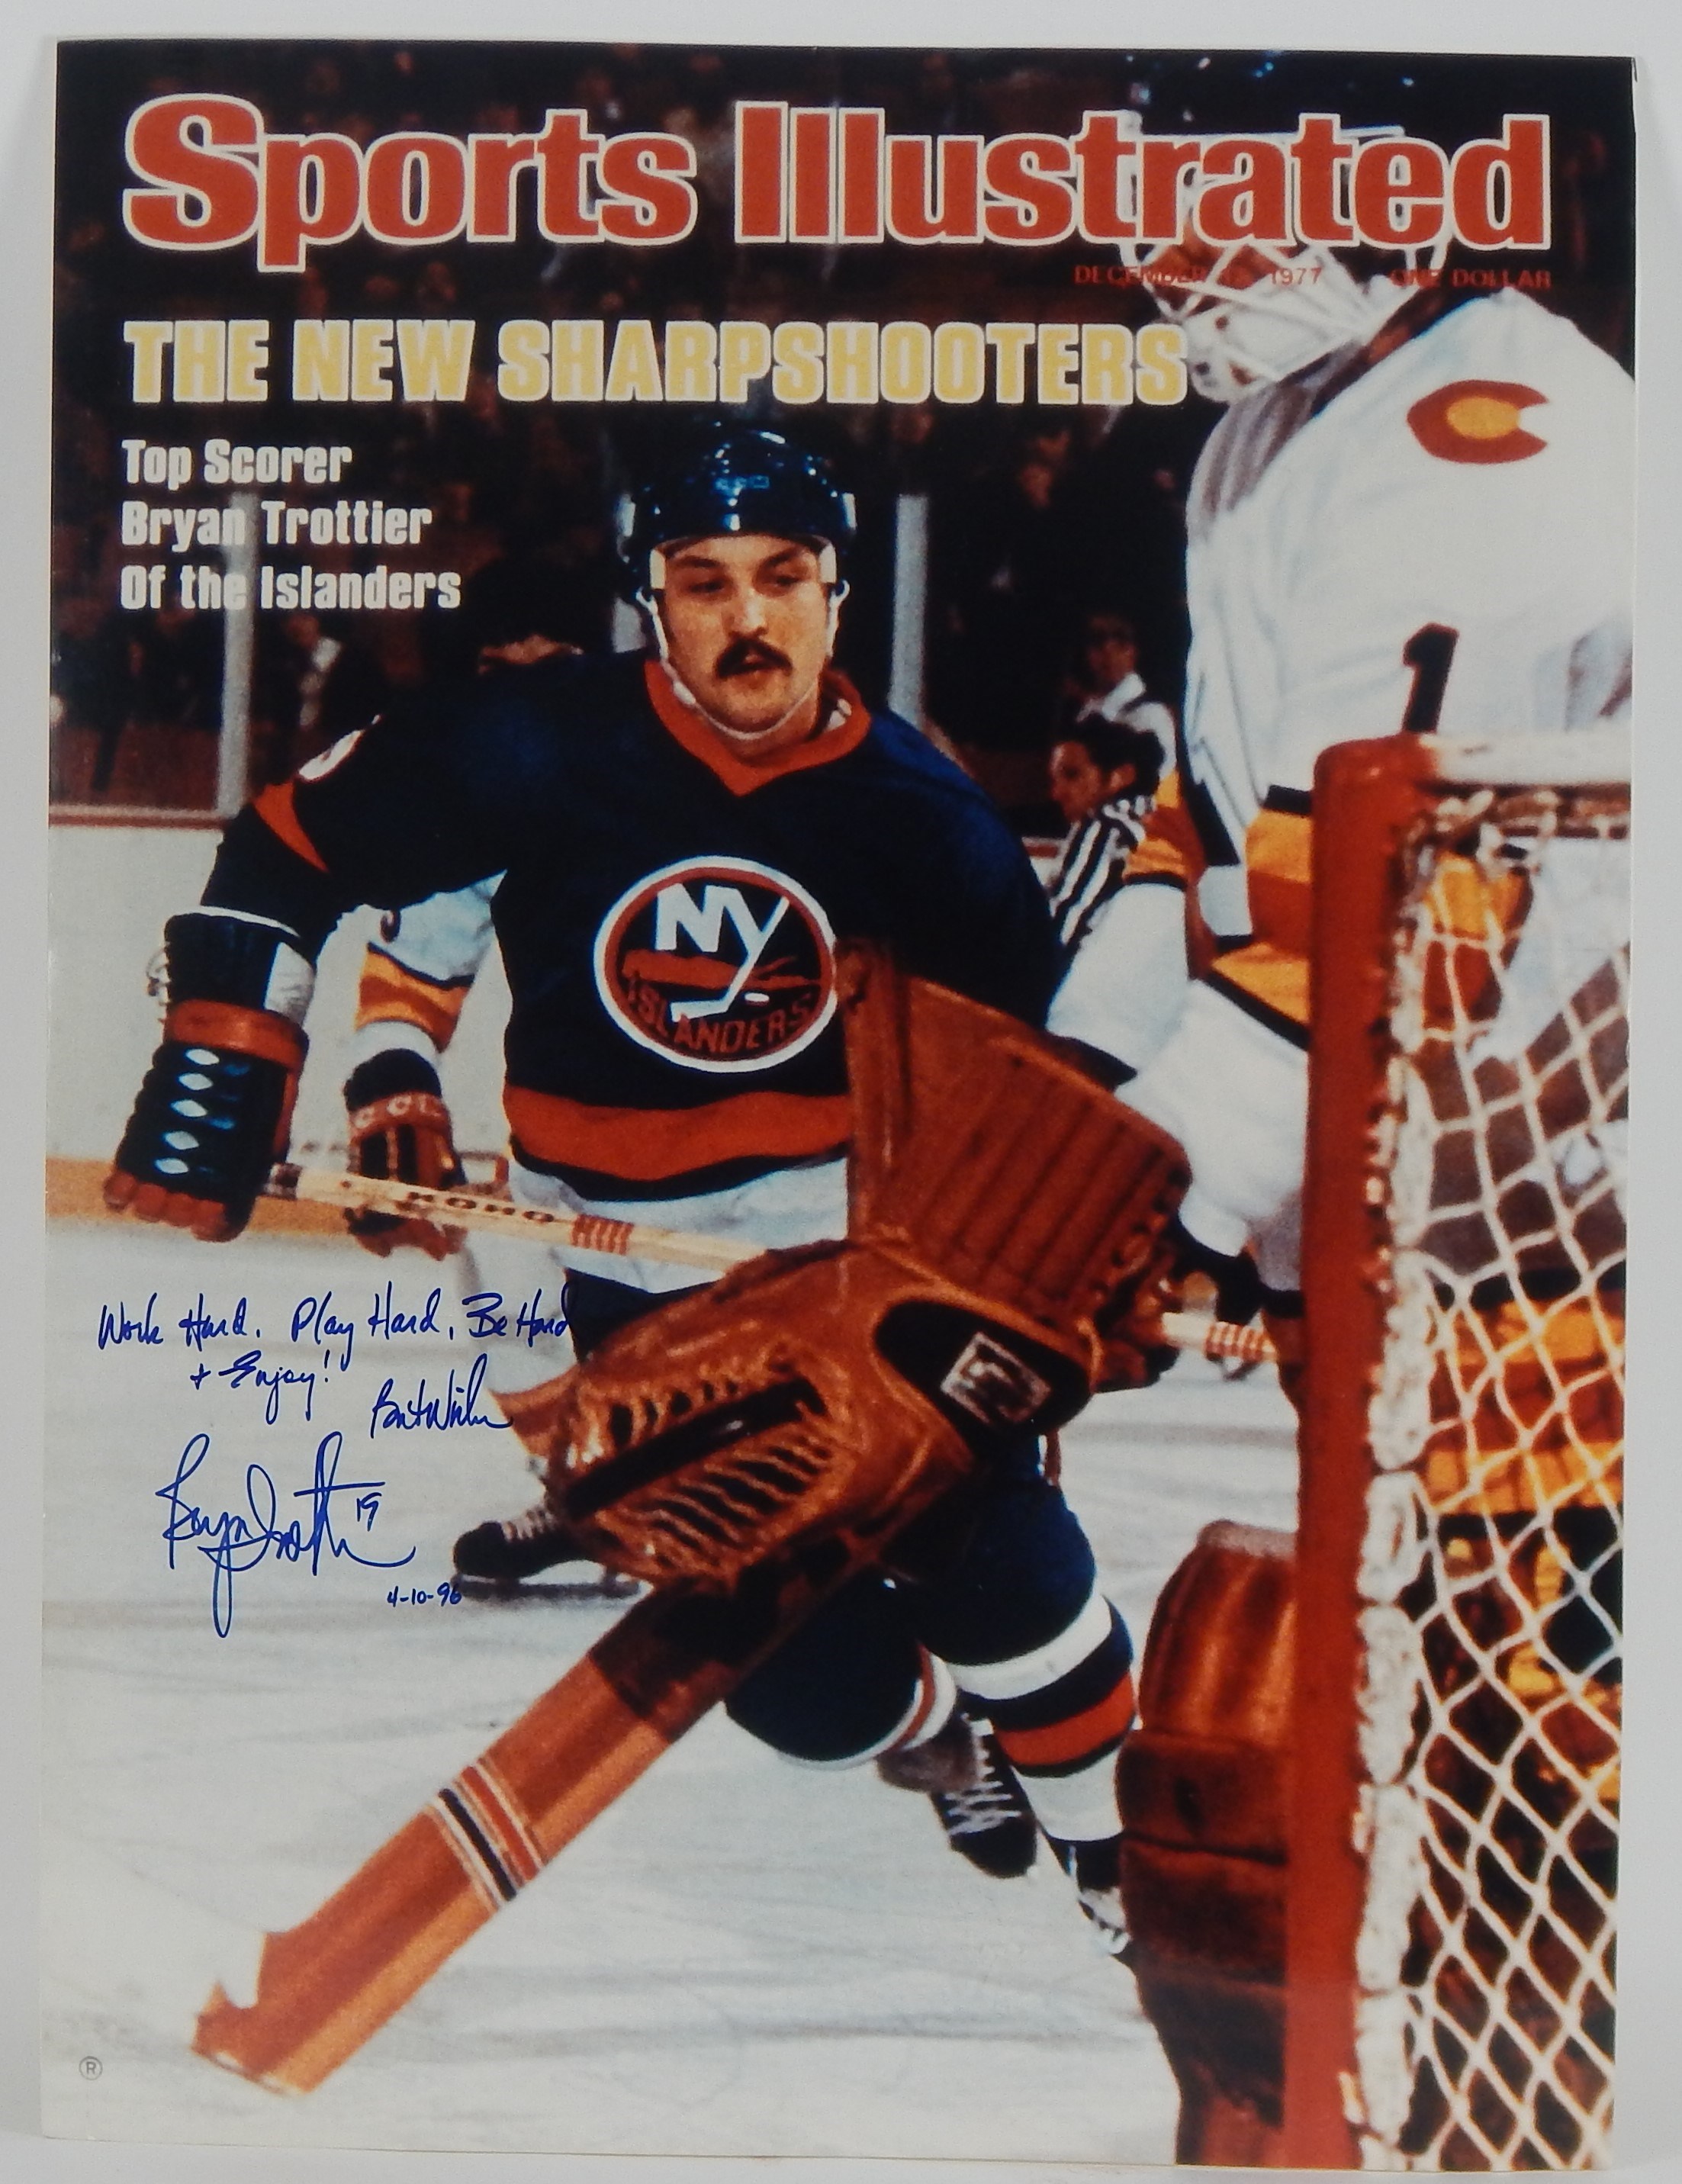 Hockey - Bryan Trottier Signed Oversized Sports Illustrated Cover